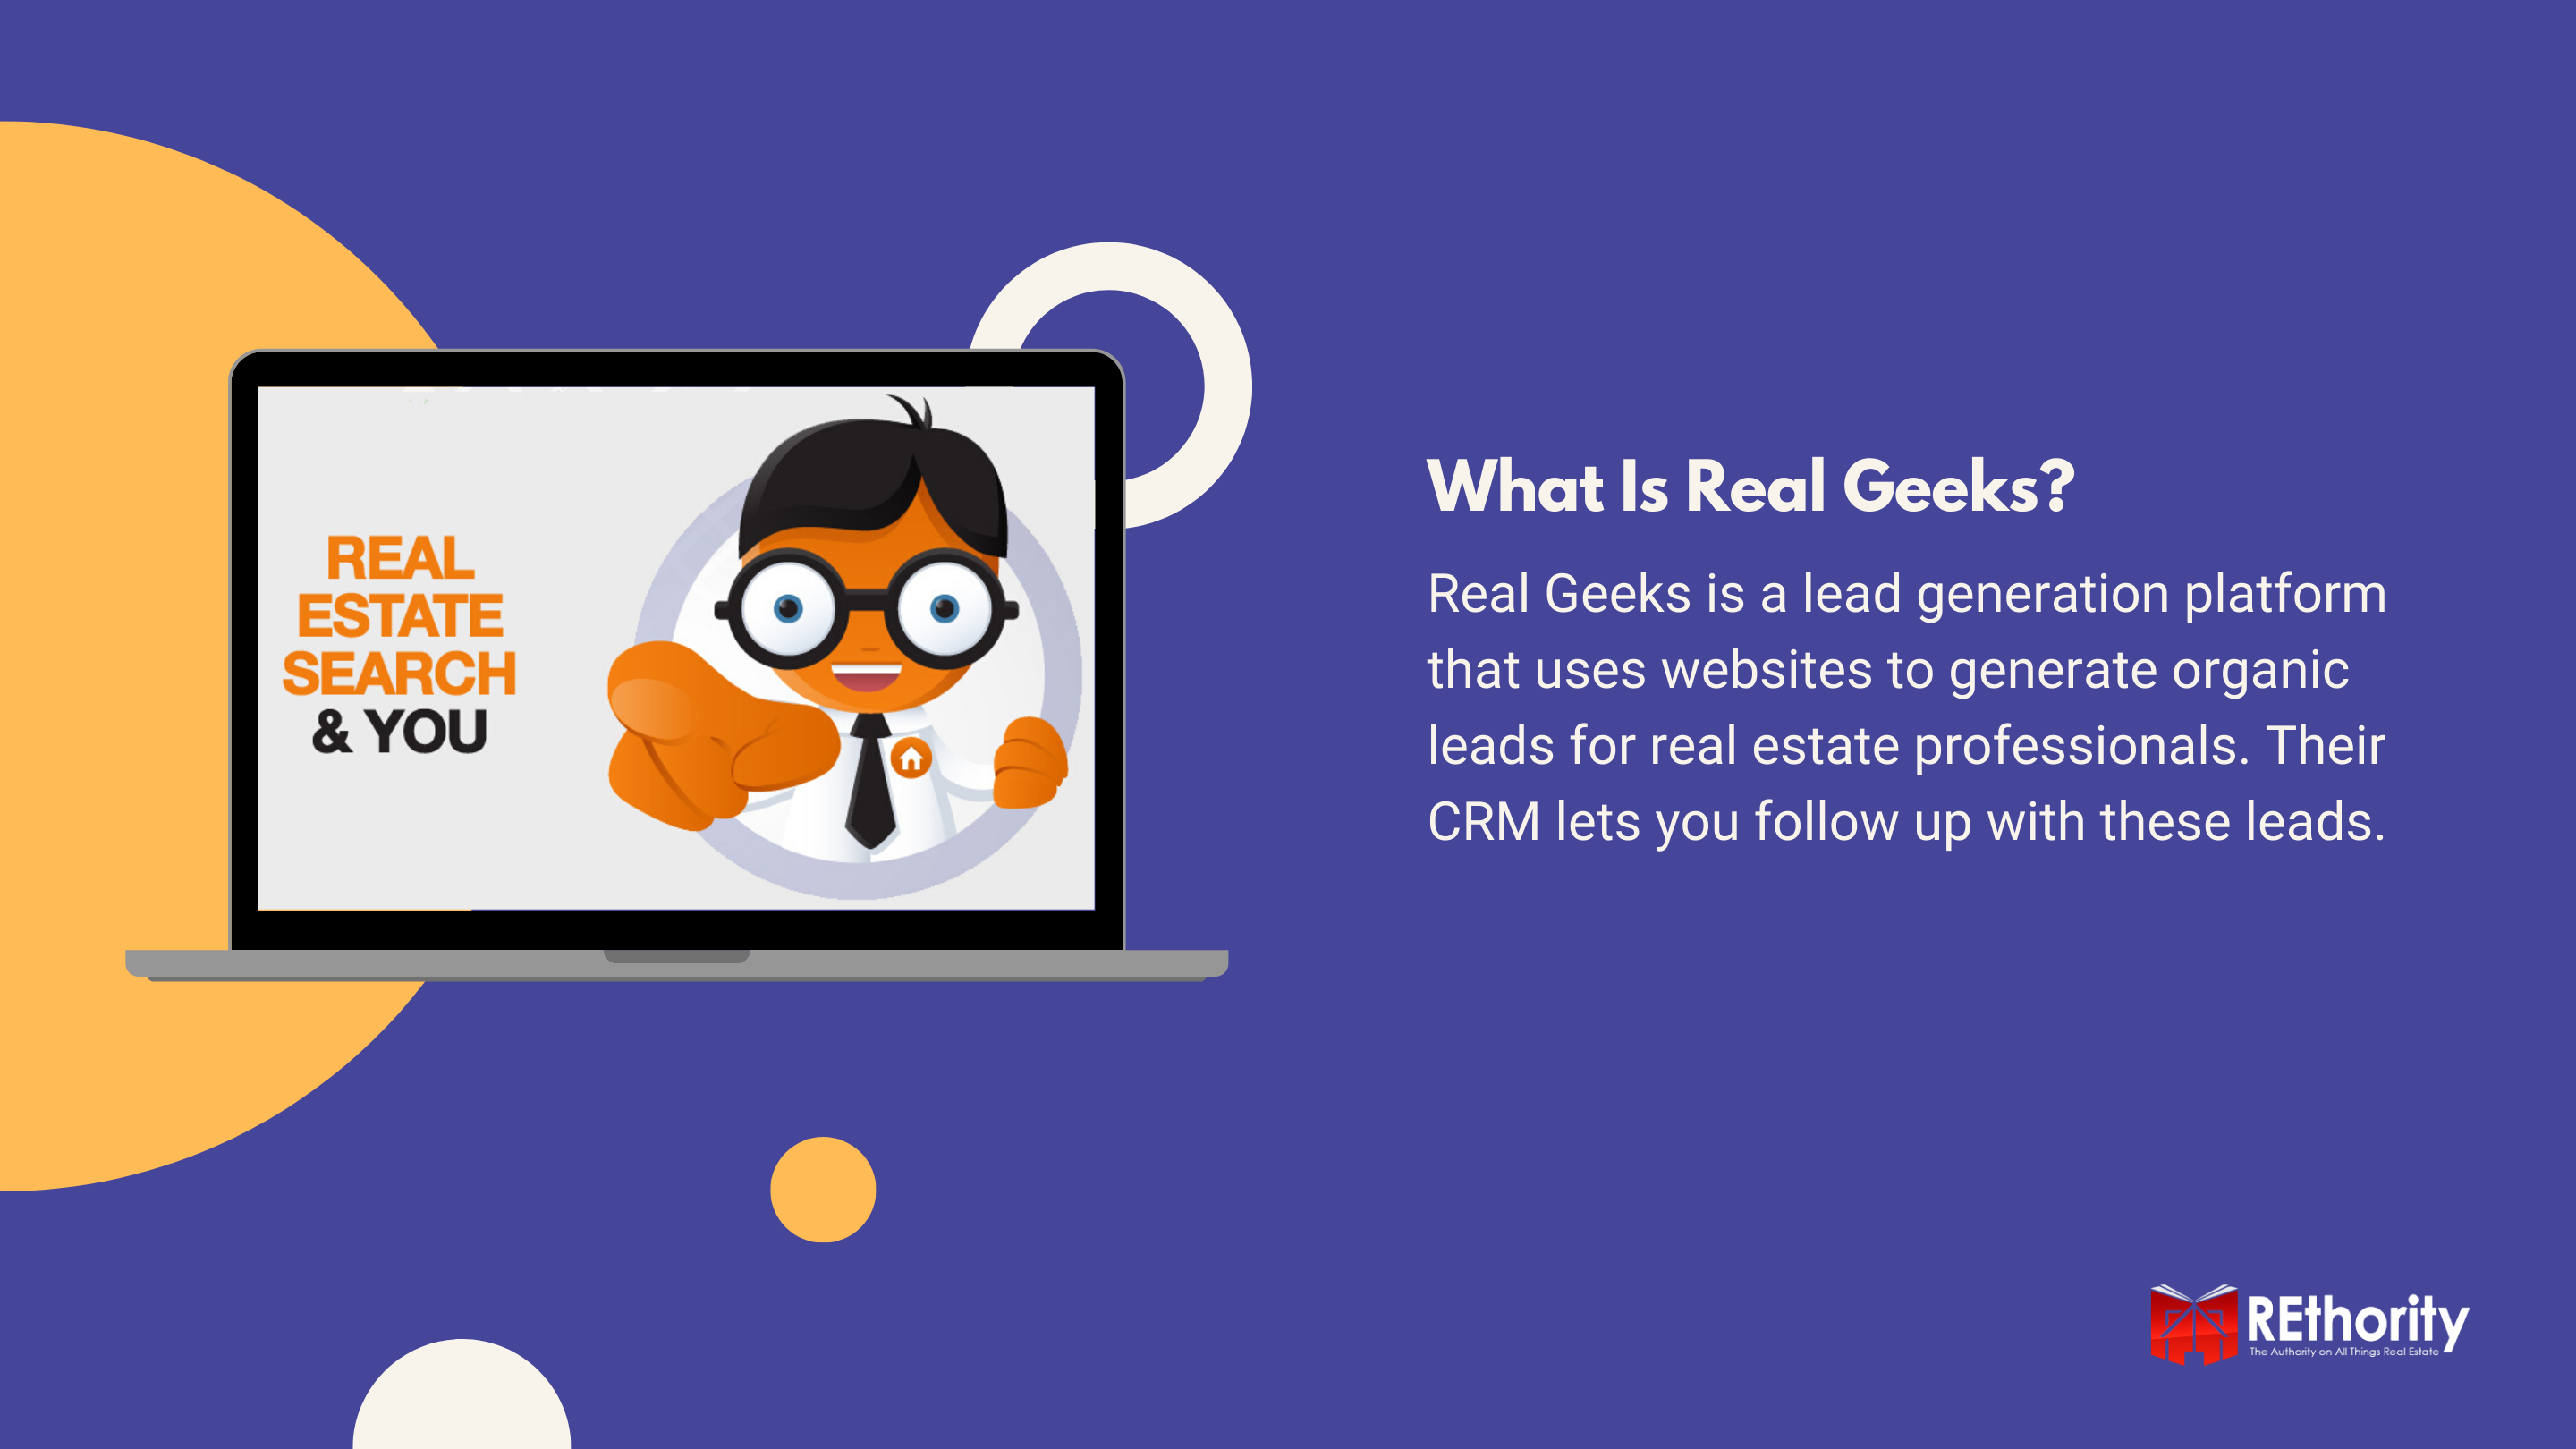 What Is Real Geeks graphic against a blue background with the logo displayed on a silver macbook